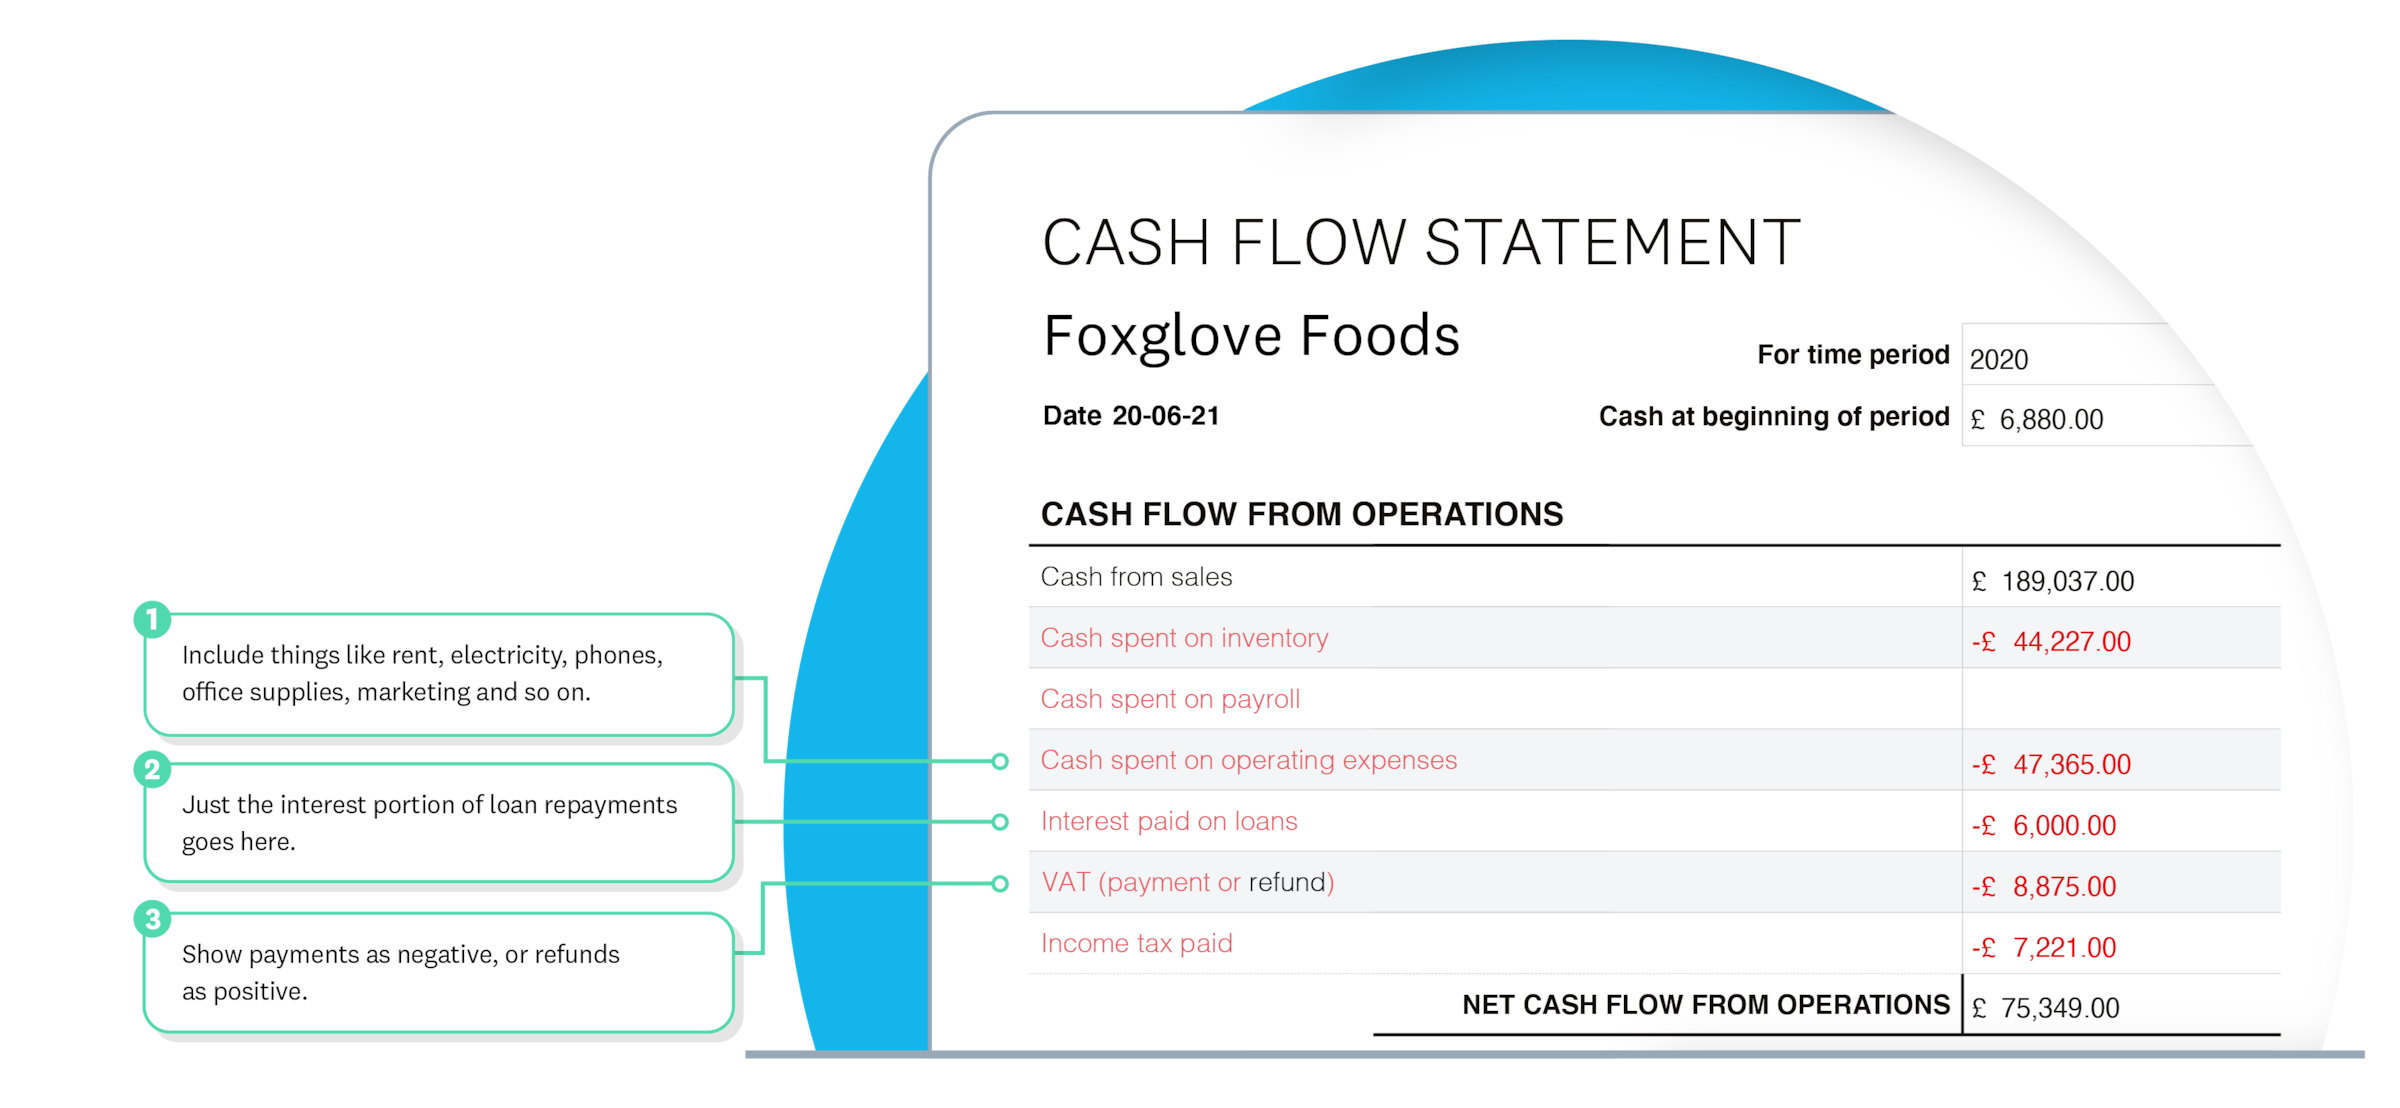 Cash flow from operations shows money in from sales, minus money out on stock, payroll, operations, loan interest and tax